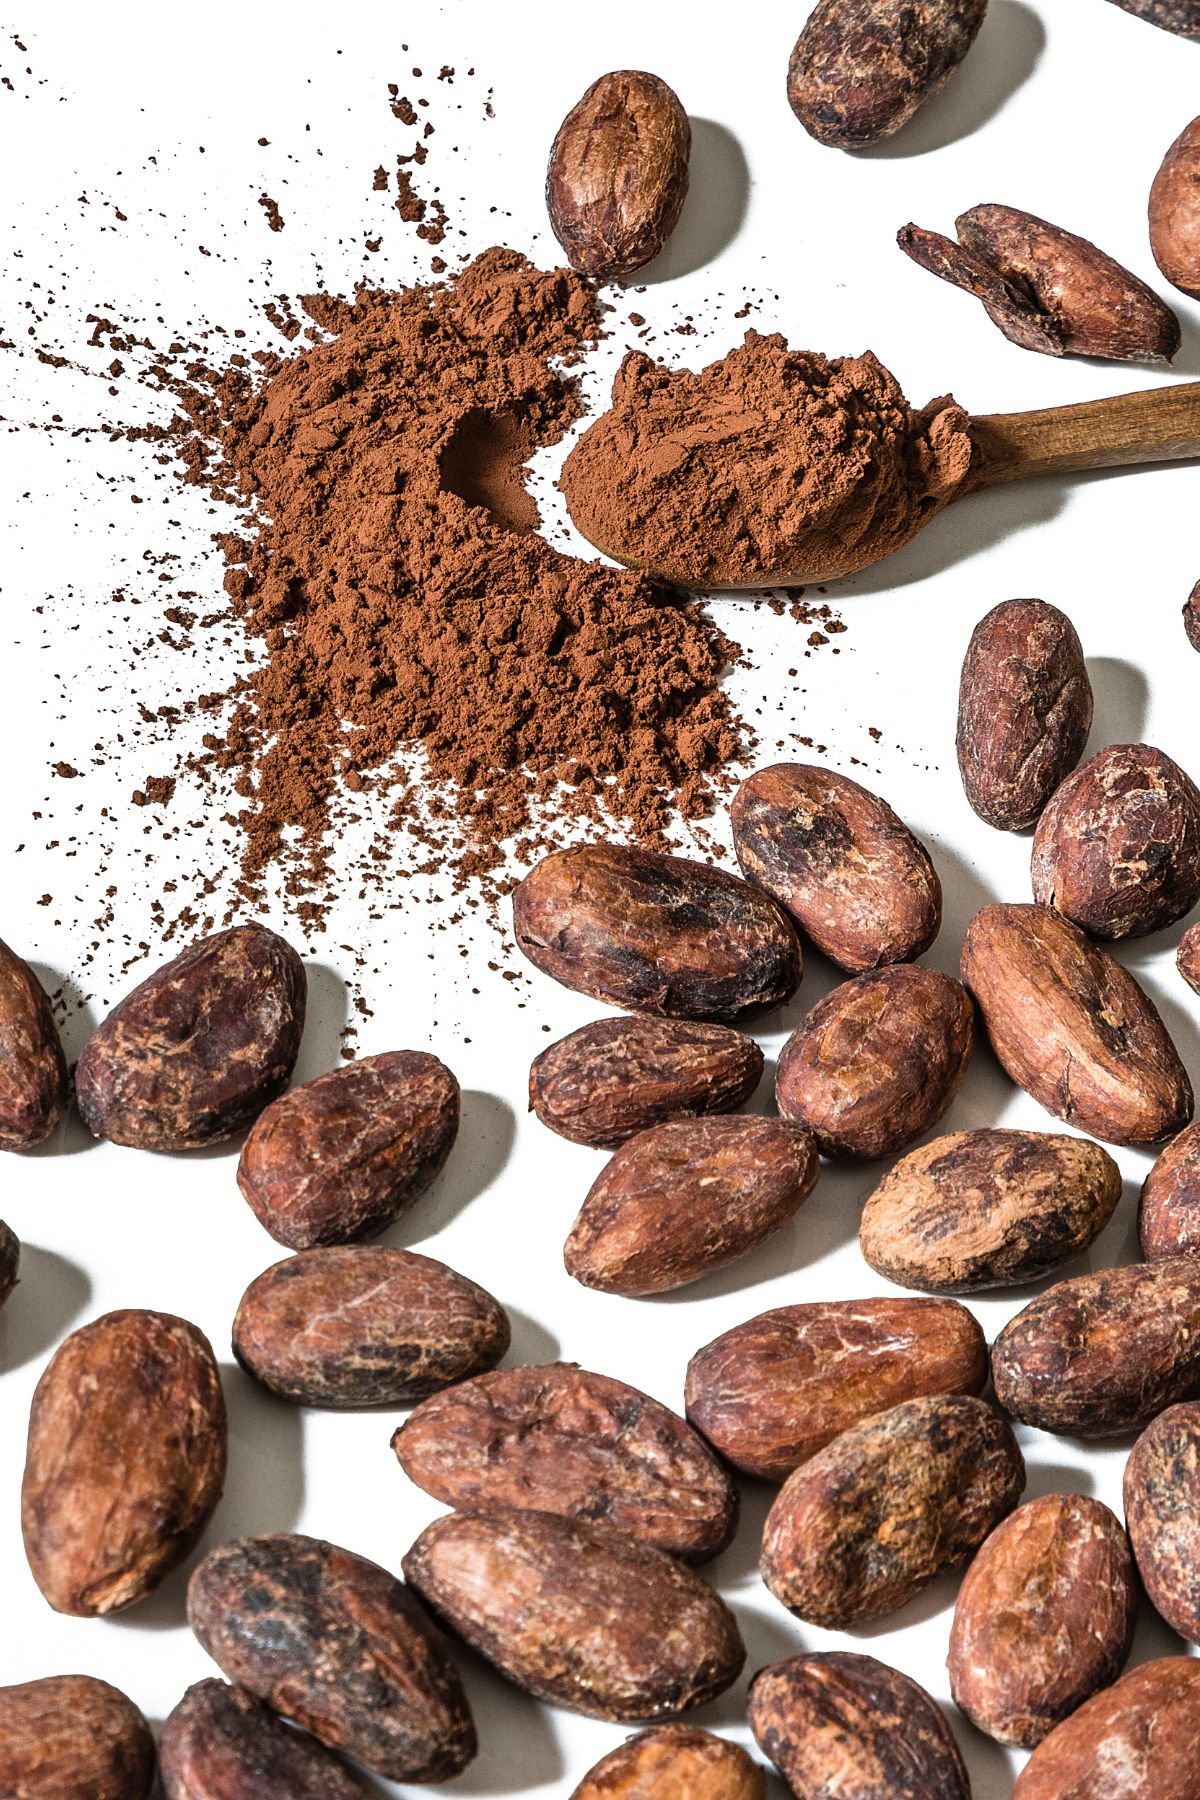 Cocoa beans on a white surface.